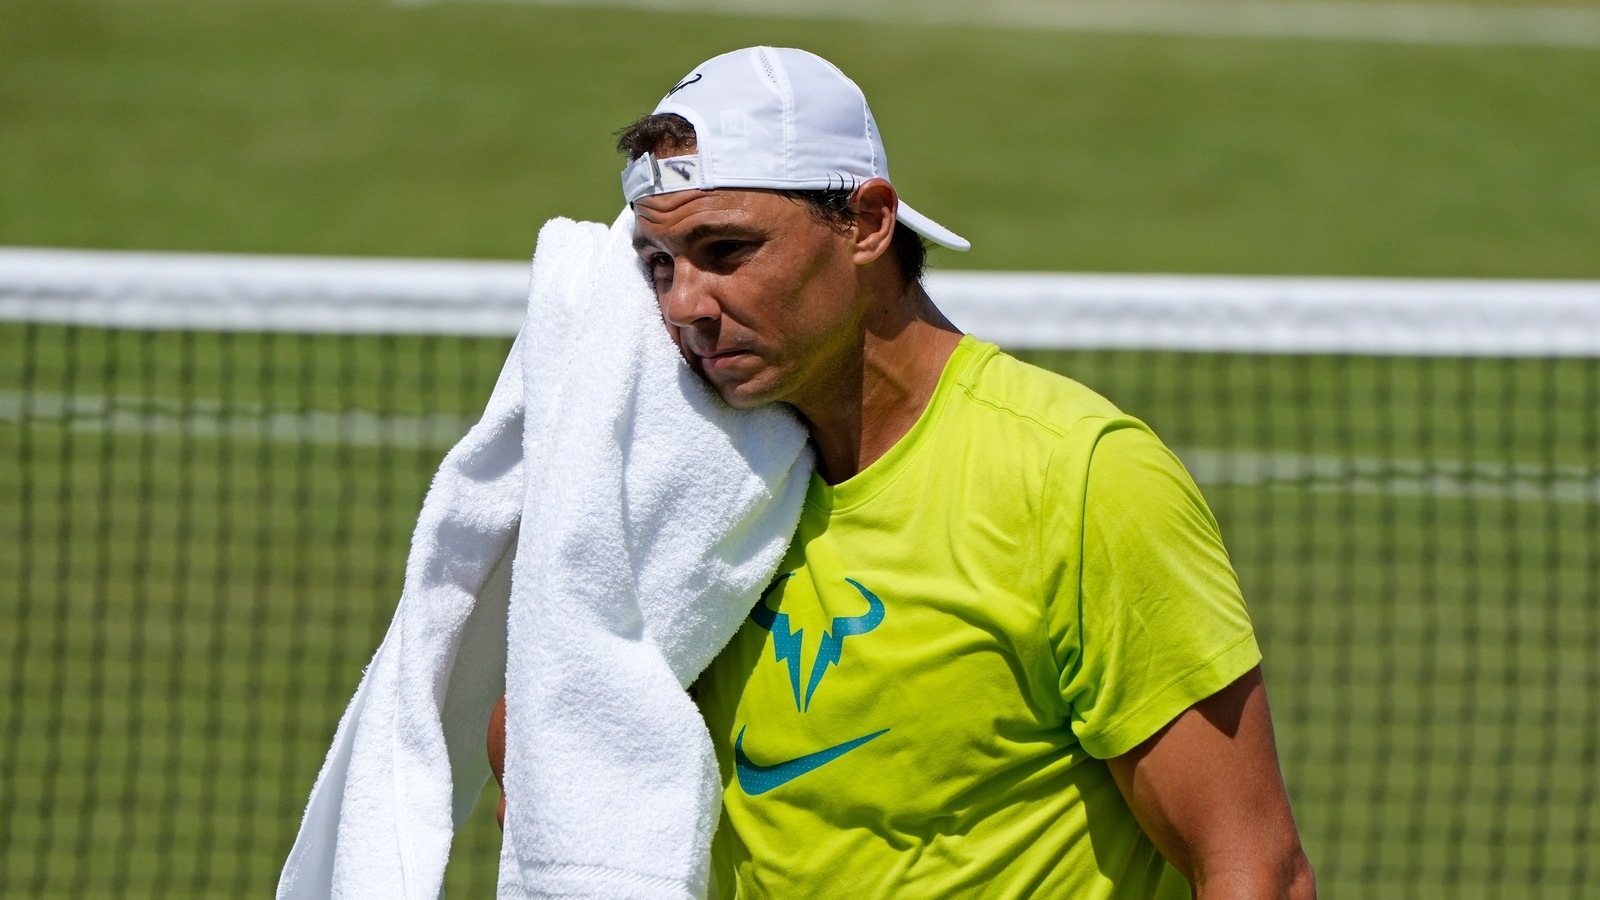 Covid-19 fear deepens as Nadals picture goes viral after Berrettini pulls out Tennis News